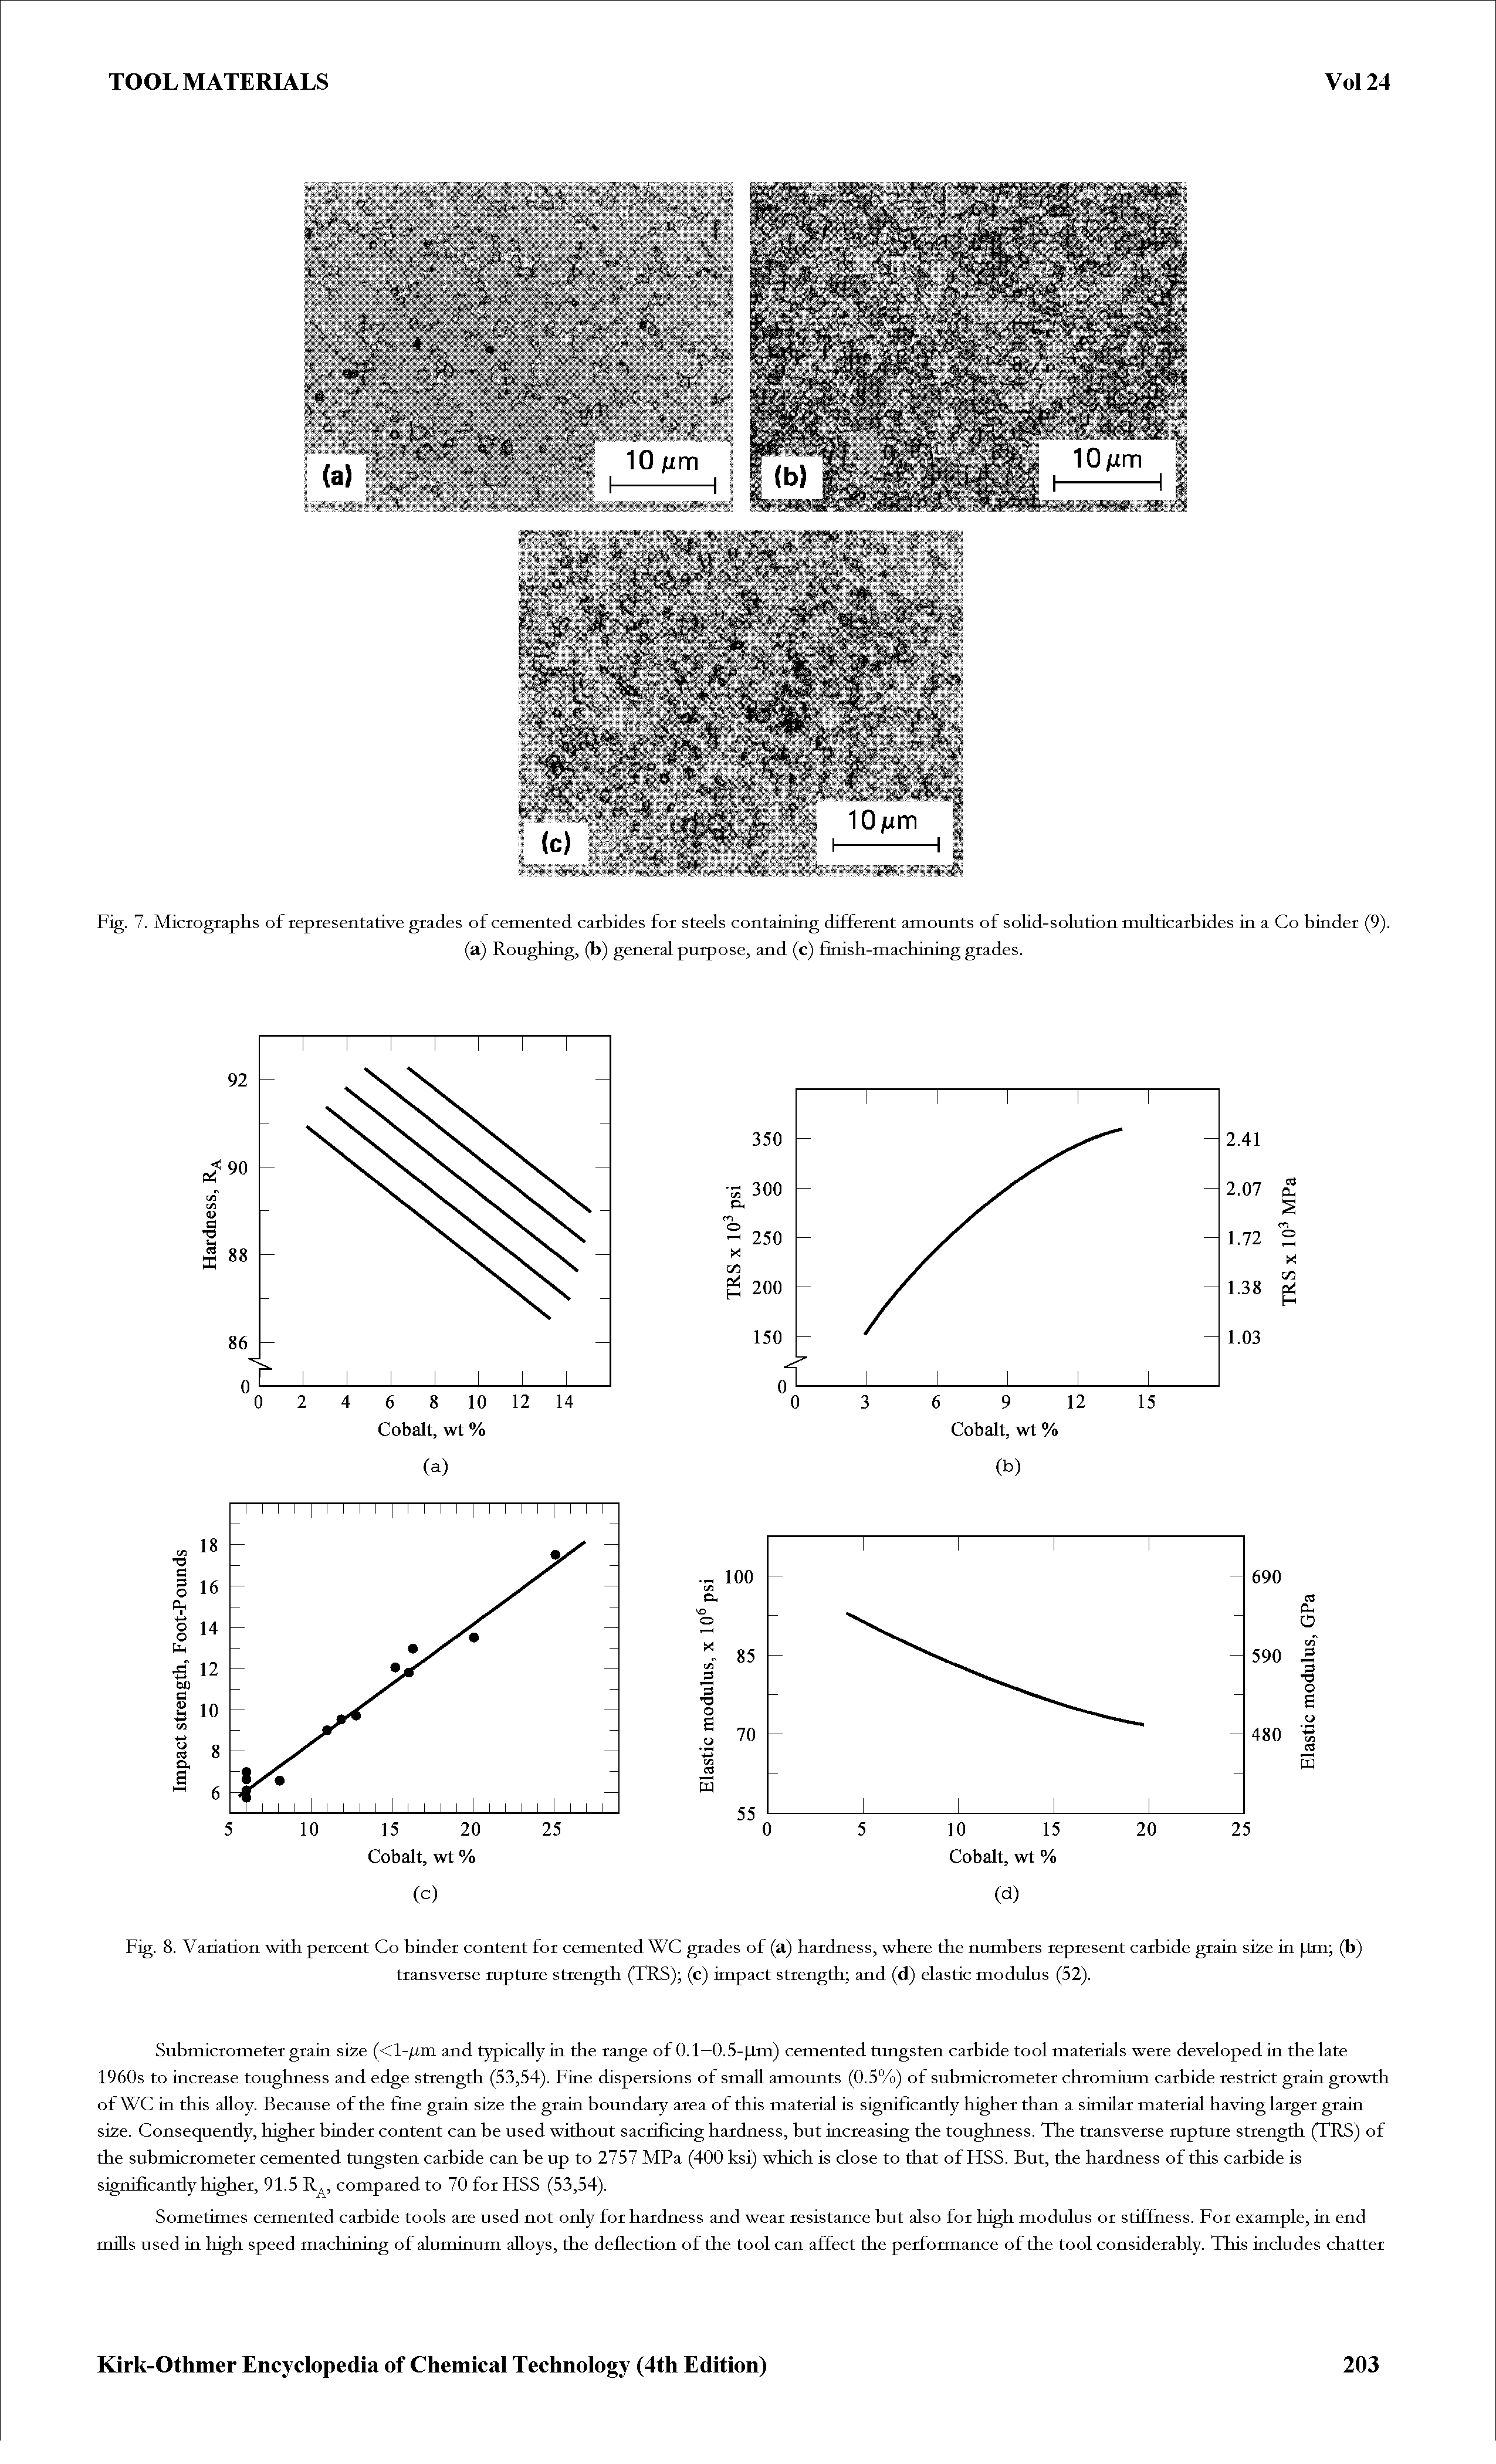 Fig. 8. Variation with percent Co binder content for cemented WC grades of (a) hardness, where the numbers represent carbide grain size in pm (b)...